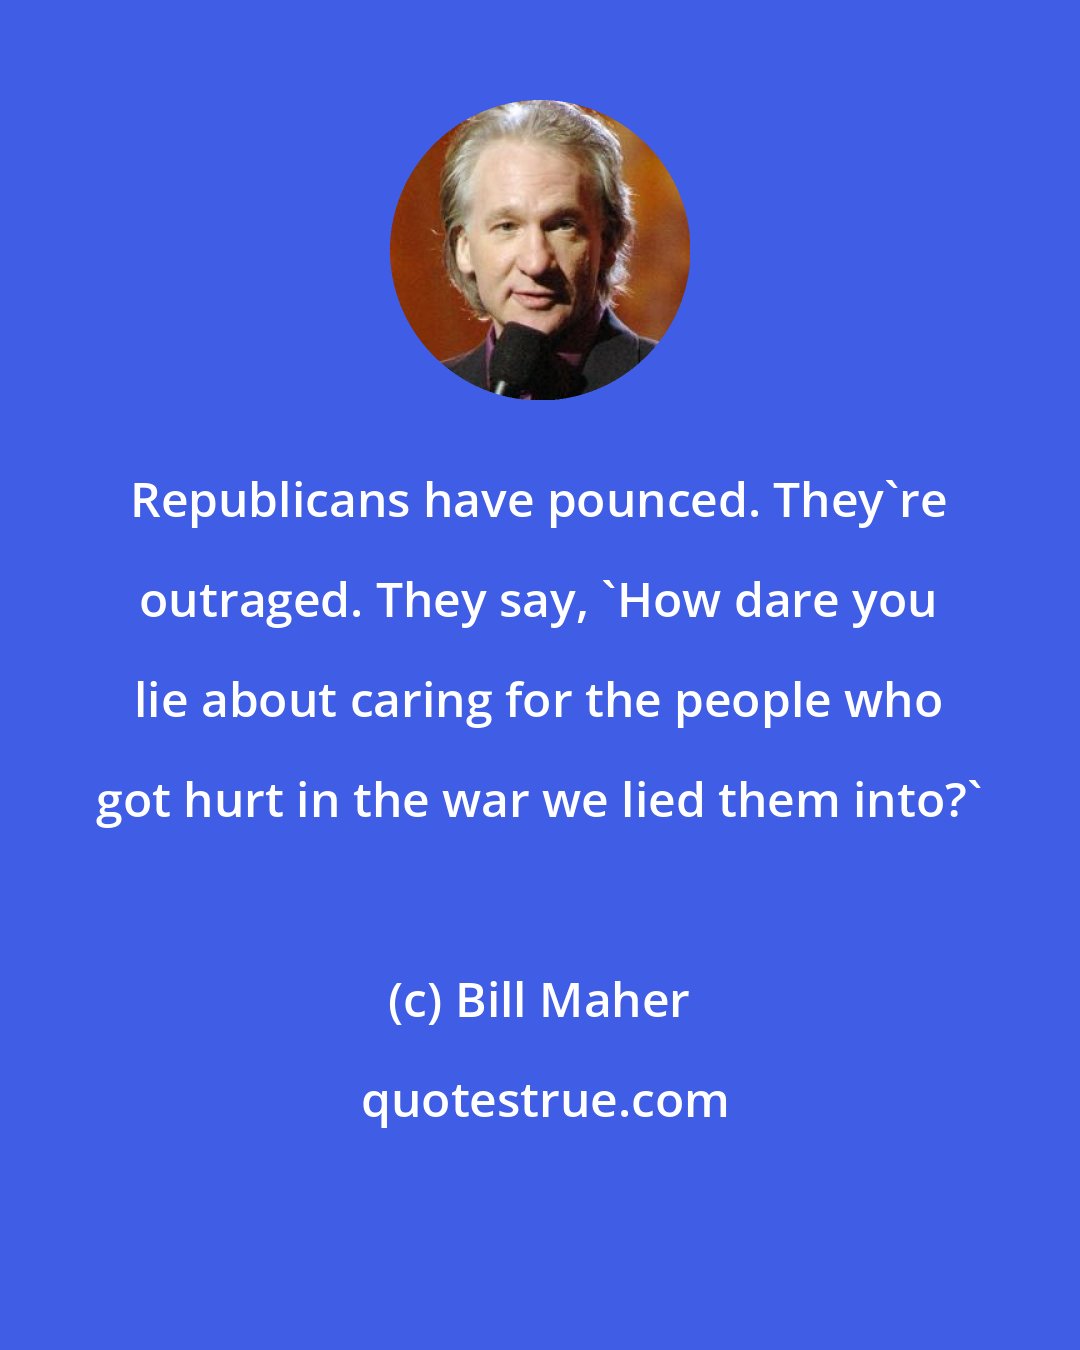 Bill Maher: Republicans have pounced. They're outraged. They say, 'How dare you lie about caring for the people who got hurt in the war we lied them into?'